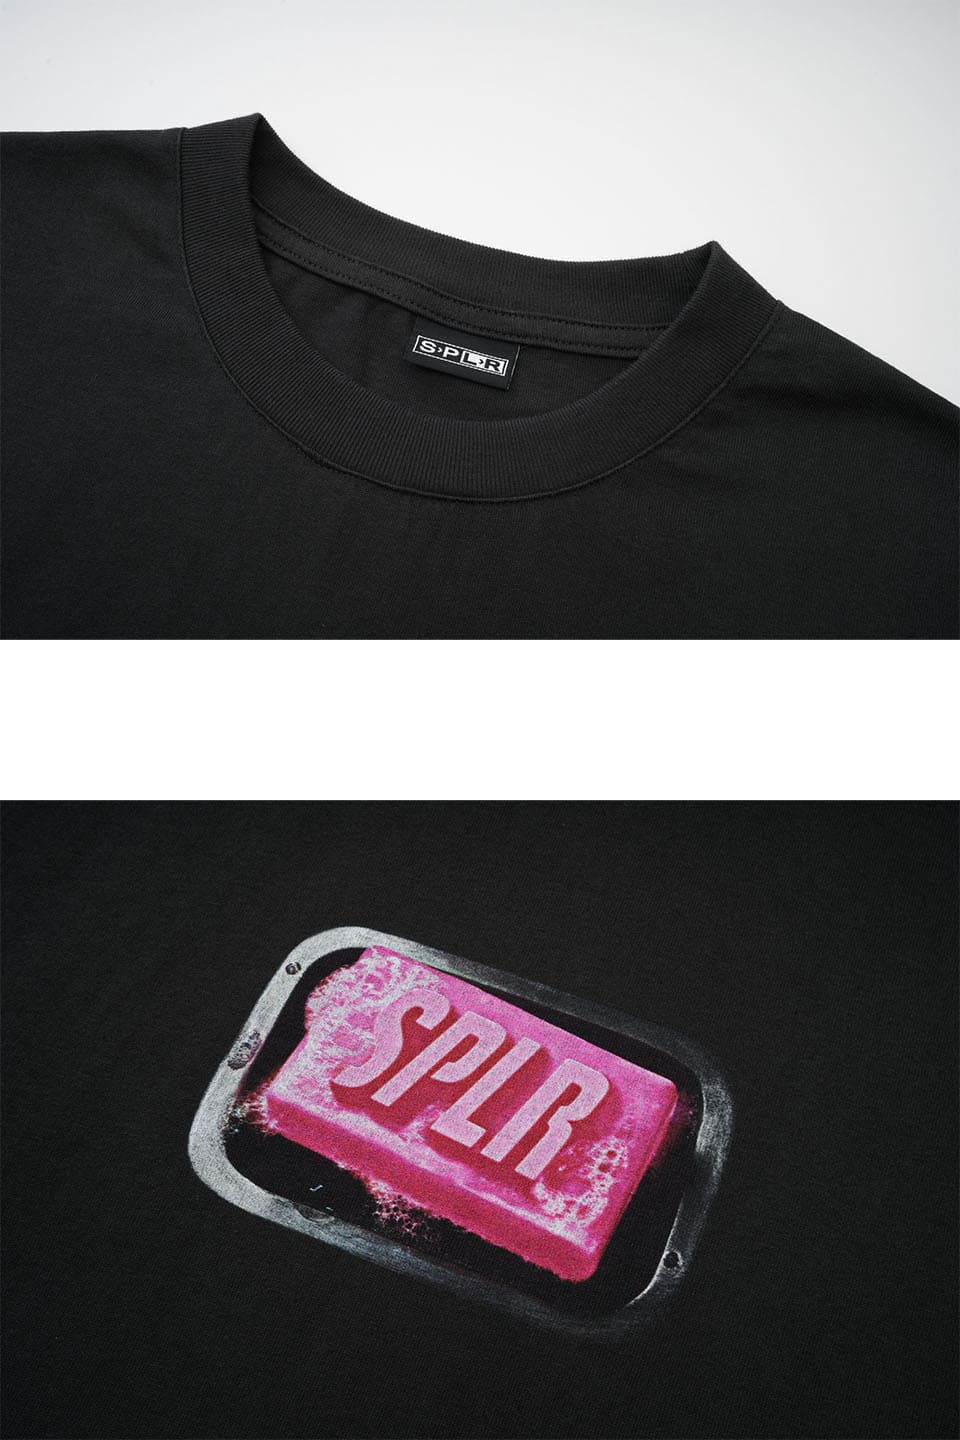 Soap Box Fit Tee